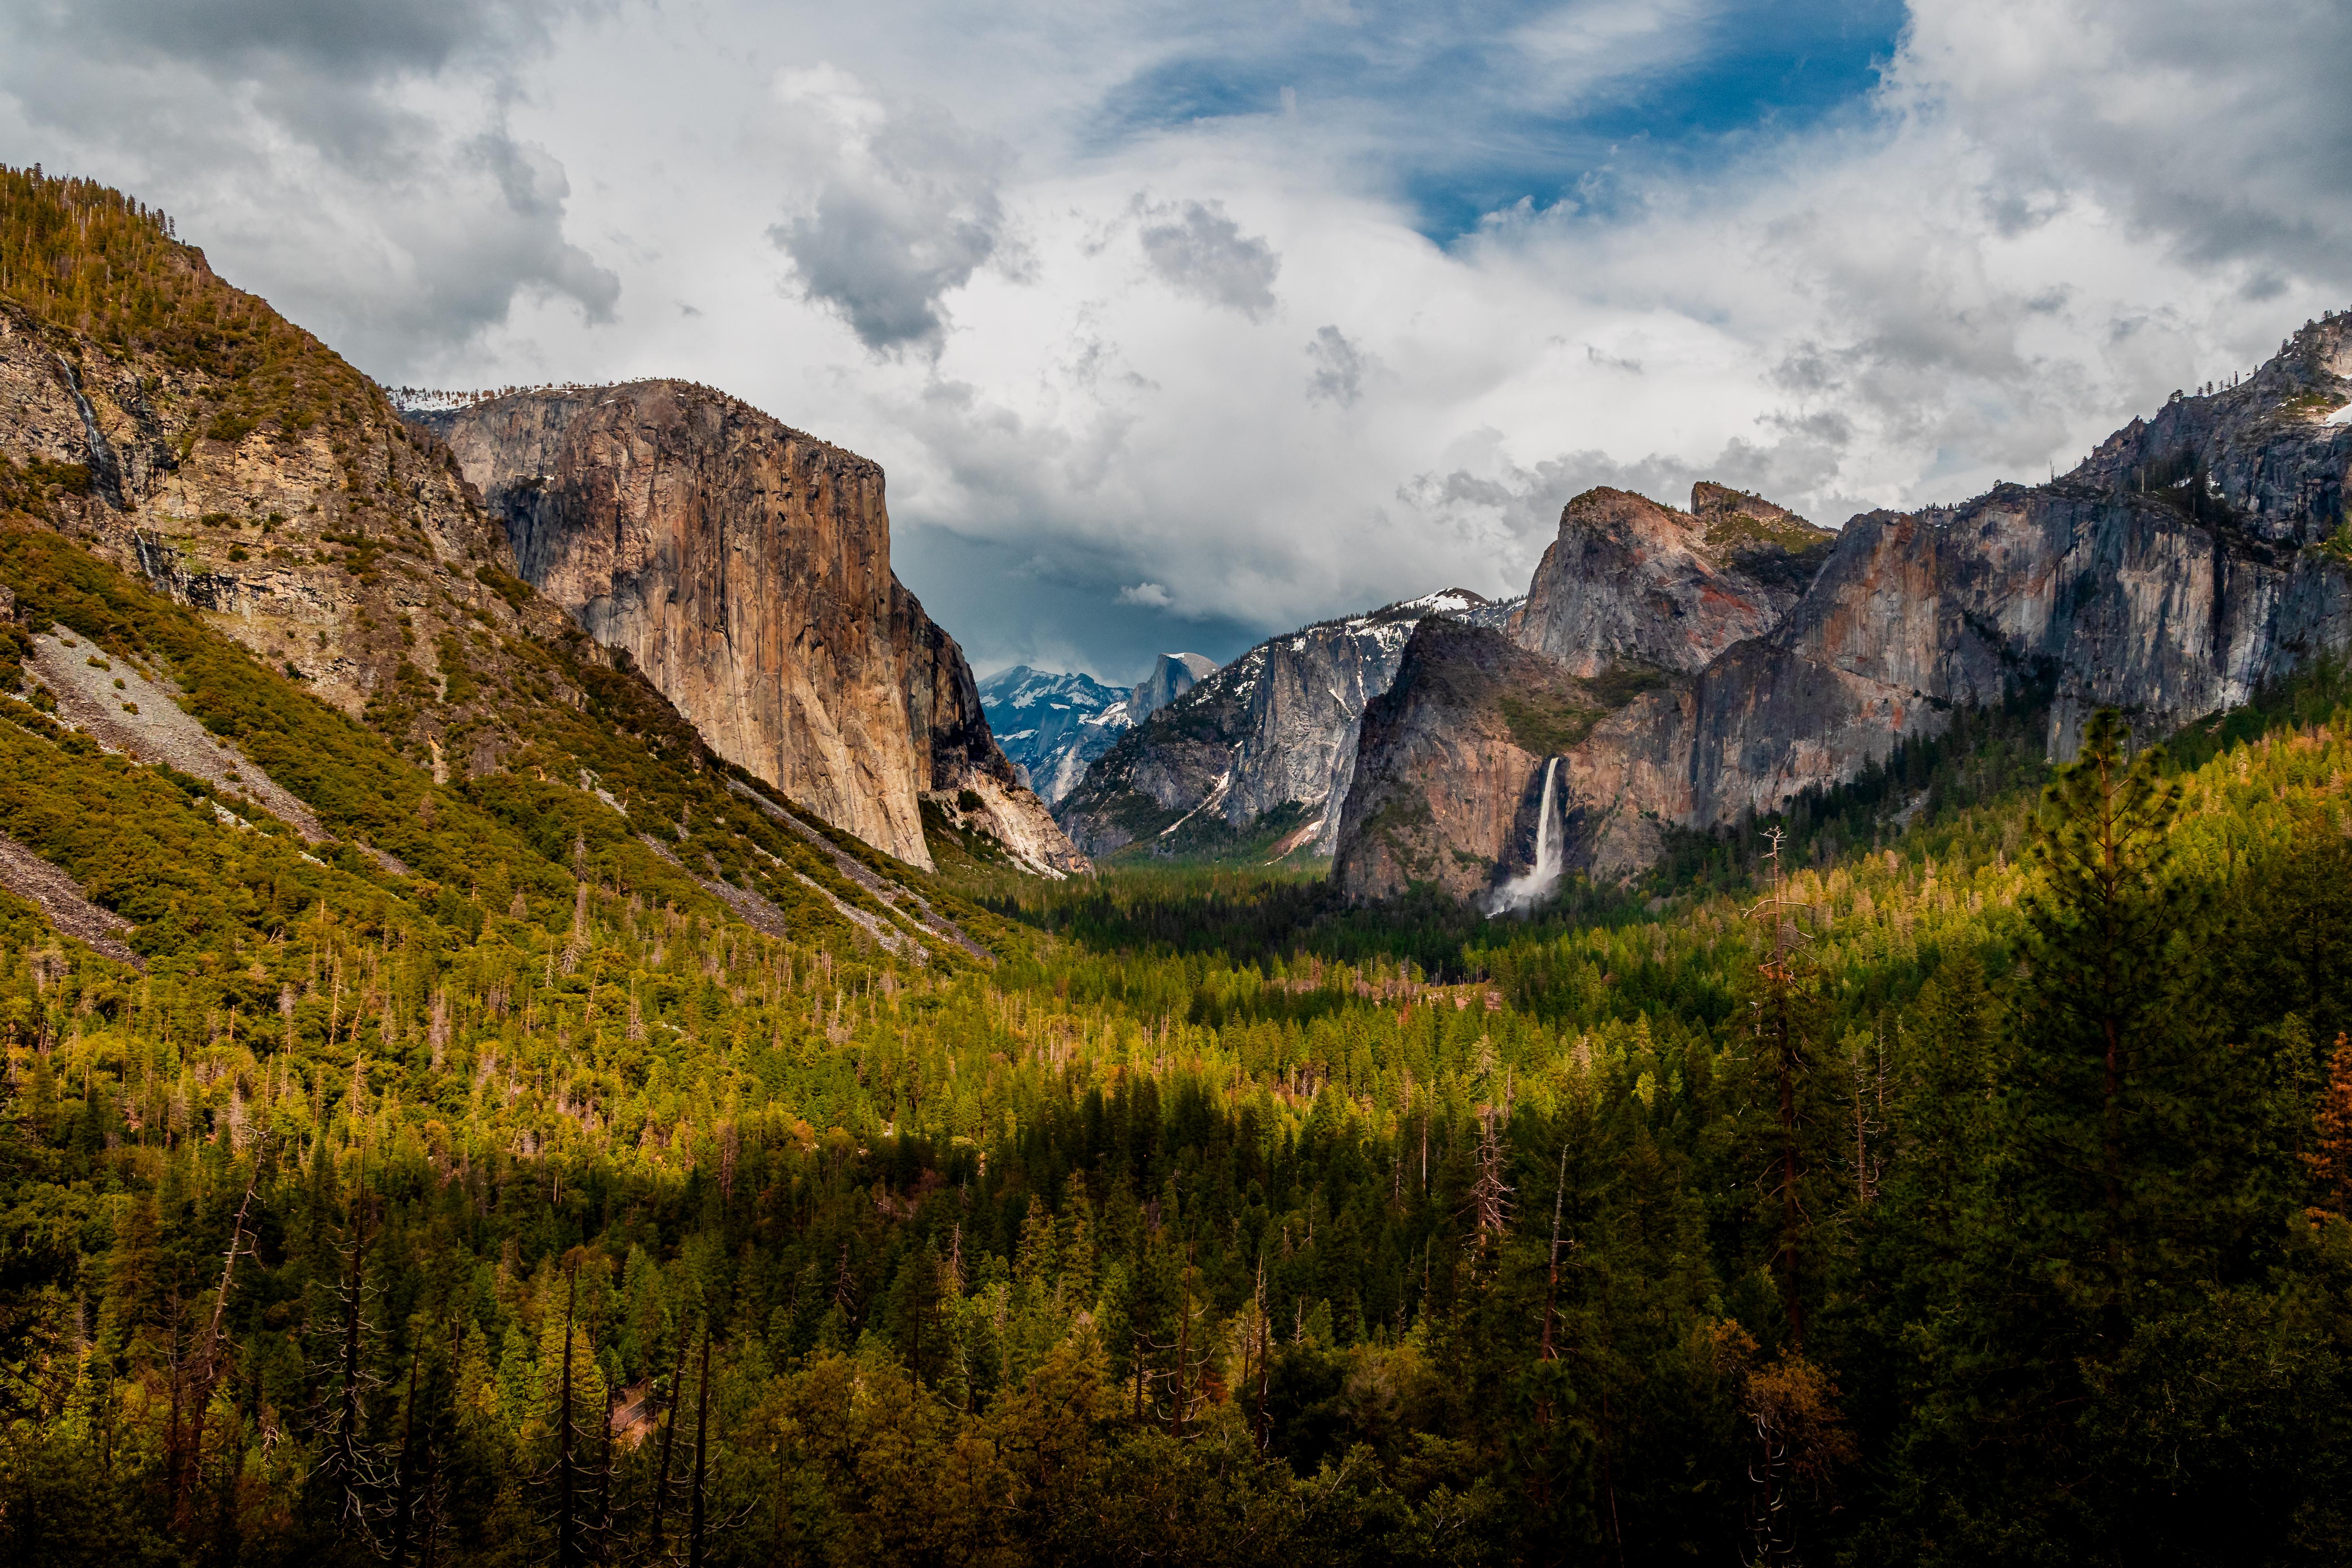 Valley Nature Yosemite Valley California USA Clouds Forest Cliff Landscape Waterfall 5236x3491